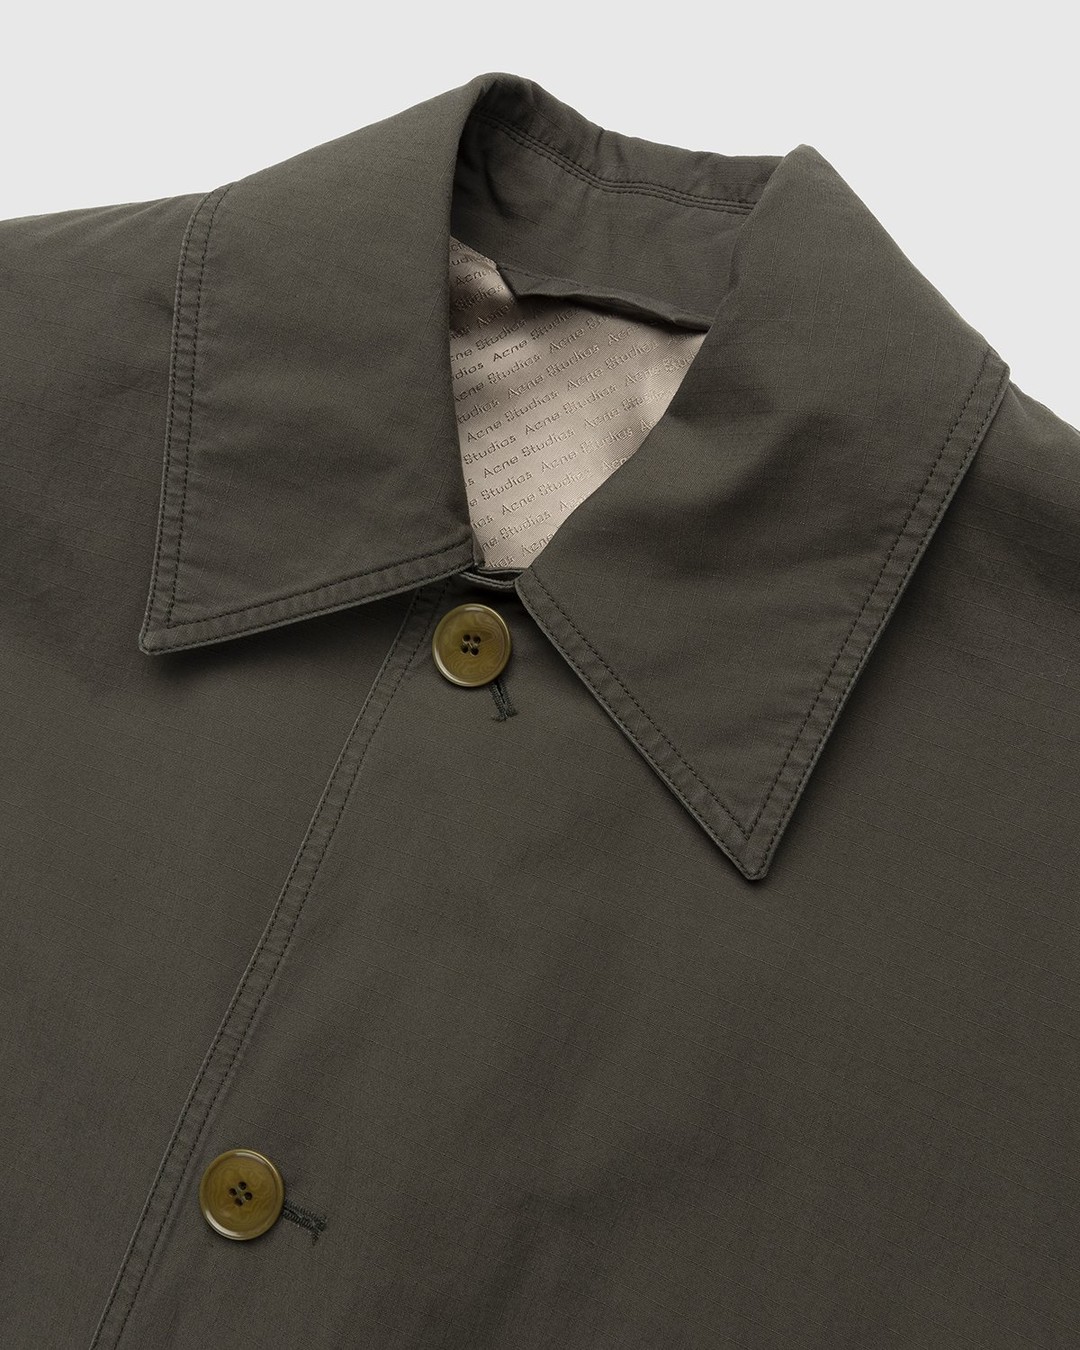 Acne Studios – Trench Coat Dark Olive - Outerwear - Green - Image 5